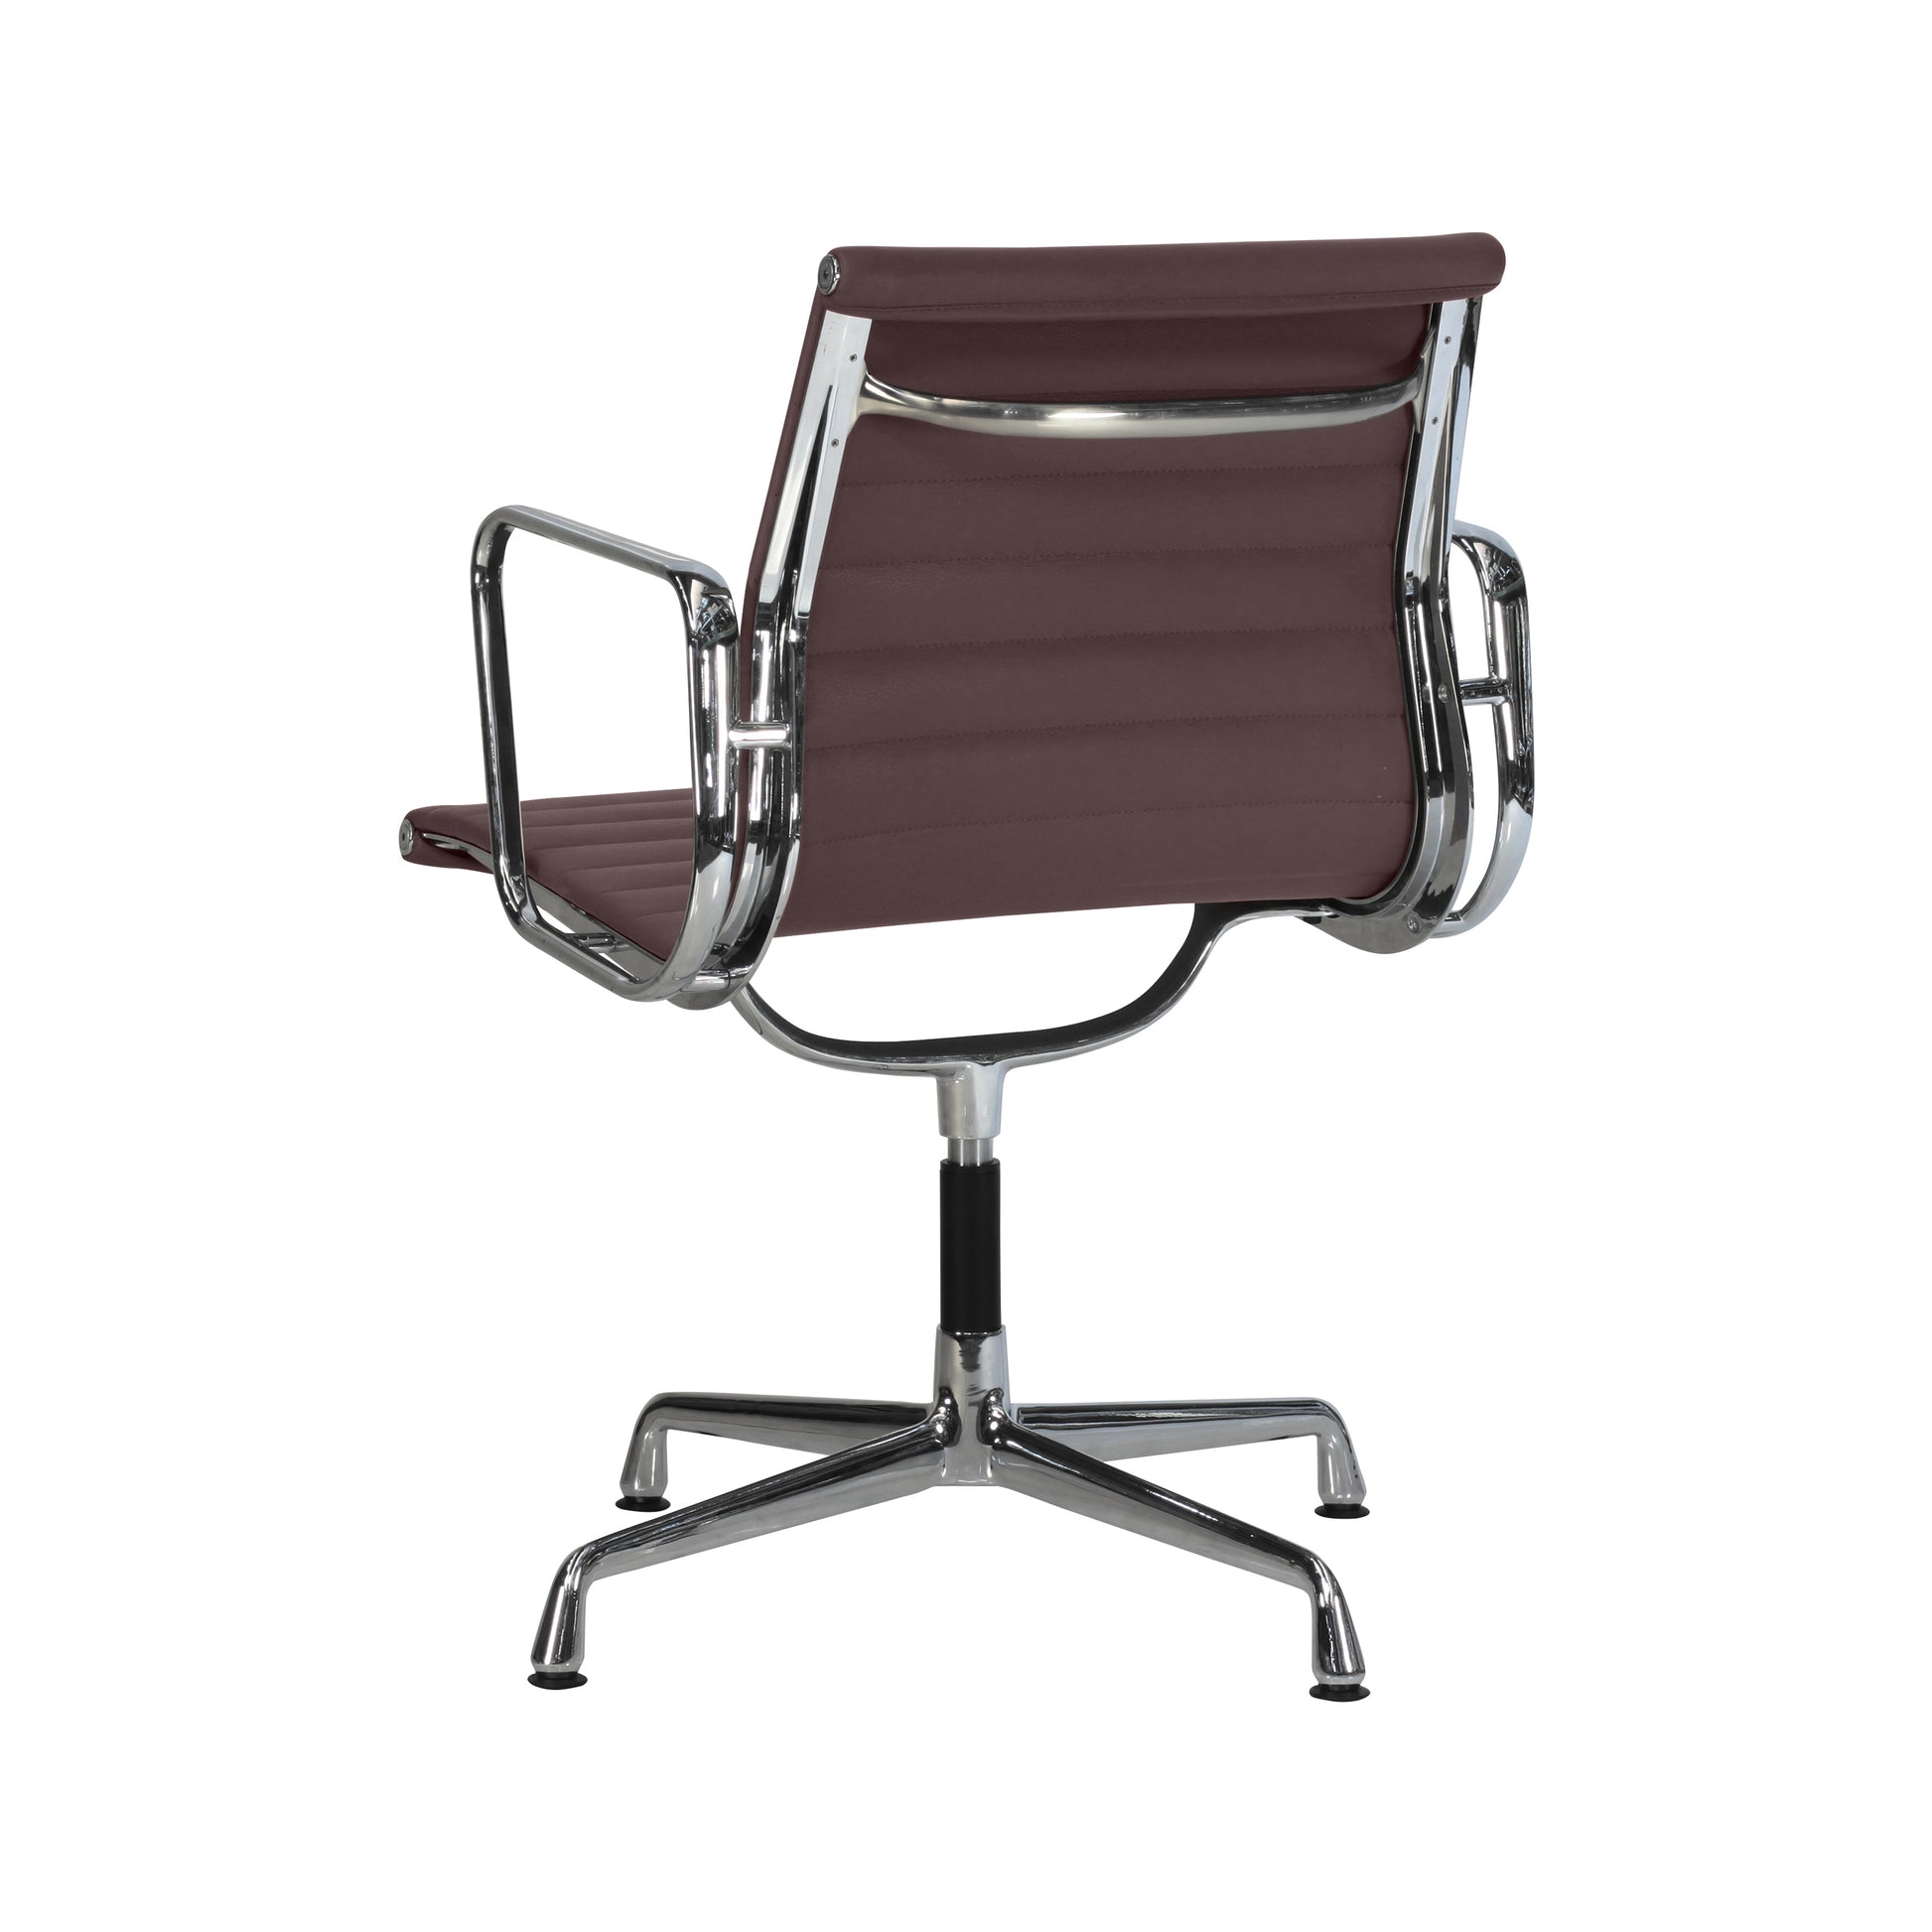 Chair without wheels aluminium style | Chocolate Leather | Back